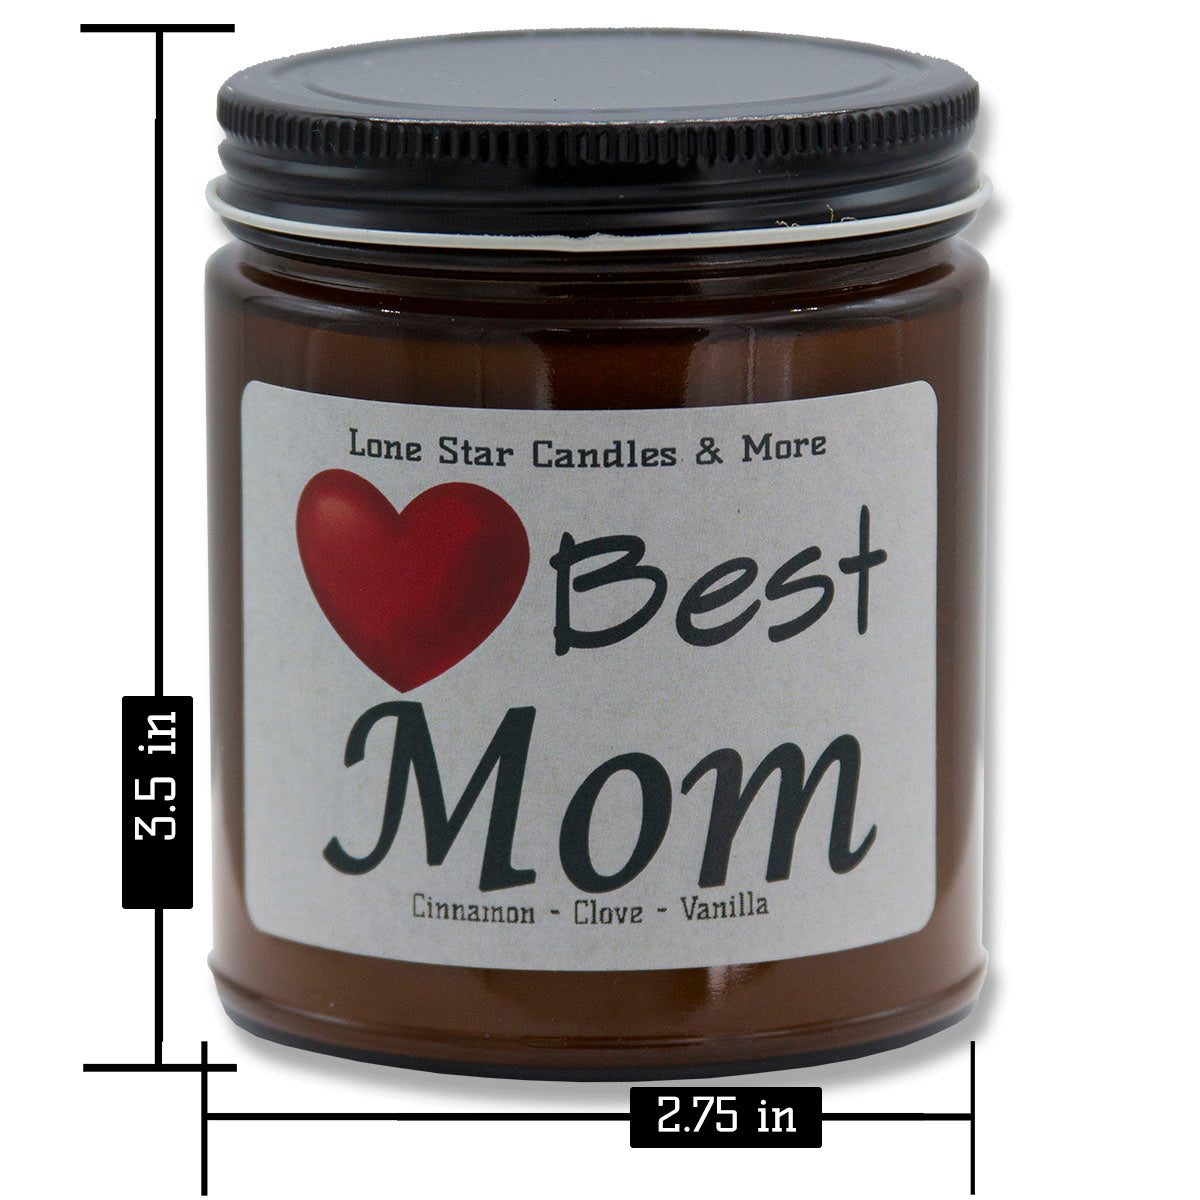 Cinnamon Vanilla, Lone Star Candles & More's Premium Hand Poured Strong Scented Soy Wax Gift Candle, Ground Cinnamon & Sweet Vanilla Bean, USA Made in Texas, Round Amber Glass Jars, 9oz Best Mom